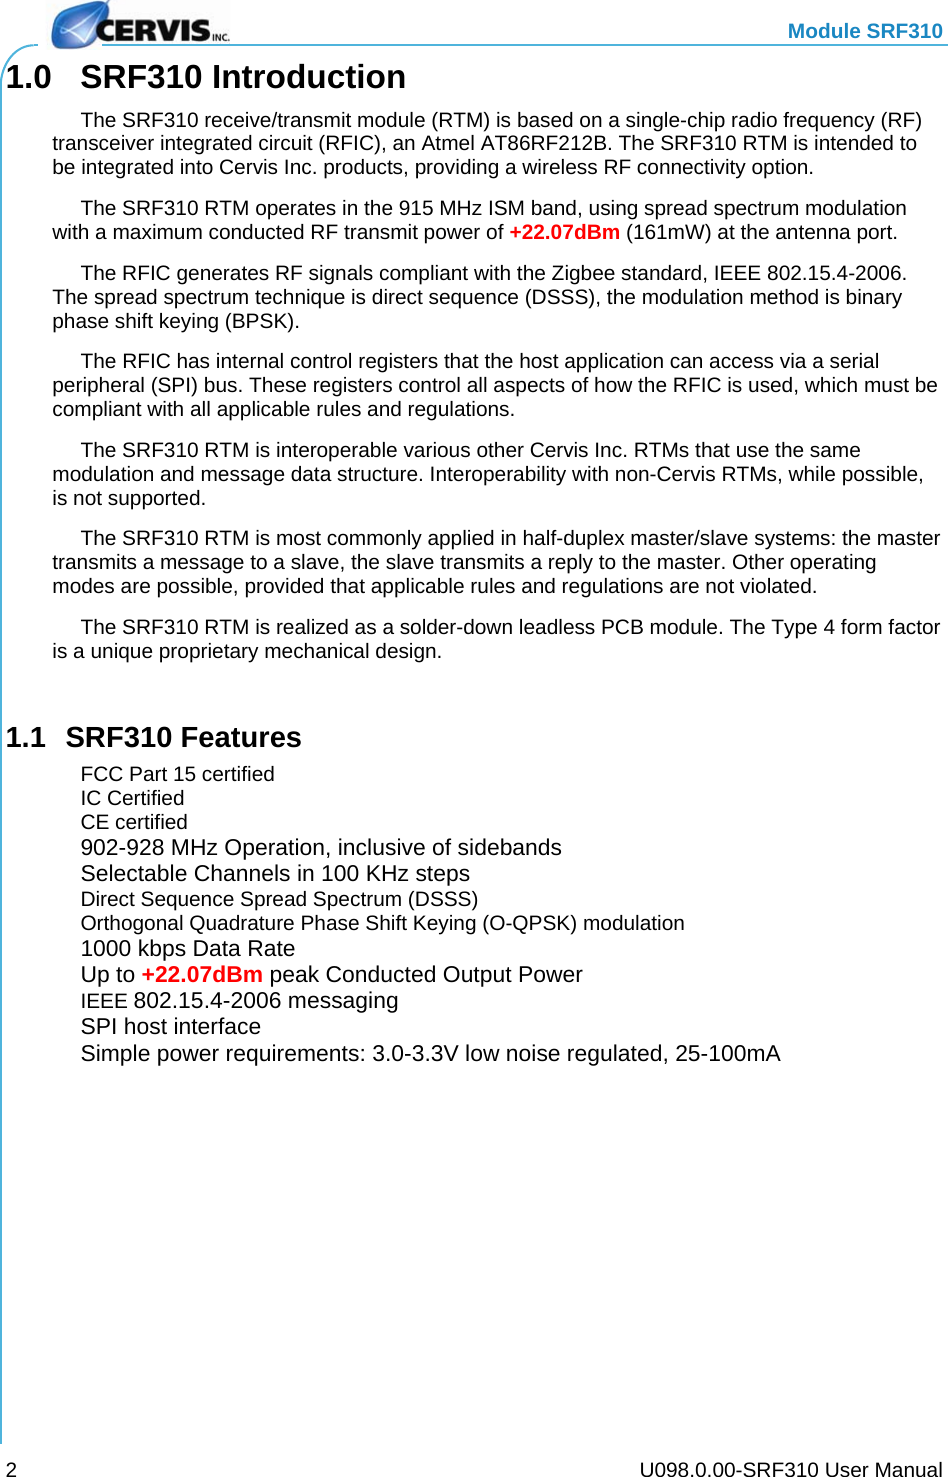   Module SRF310     U098.0.00-SRF310 User Manual 21.0 SRF310 Introduction   The SRF310 receive/transmit module (RTM) is based on a single-chip radio frequency (RF) transceiver integrated circuit (RFIC), an Atmel AT86RF212B. The SRF310 RTM is intended to be integrated into Cervis Inc. products, providing a wireless RF connectivity option.   The SRF310 RTM operates in the 915 MHz ISM band, using spread spectrum modulation with a maximum conducted RF transmit power of +22.07dBm (161mW) at the antenna port.   The RFIC generates RF signals compliant with the Zigbee standard, IEEE 802.15.4-2006. The spread spectrum technique is direct sequence (DSSS), the modulation method is binary phase shift keying (BPSK).   The RFIC has internal control registers that the host application can access via a serial peripheral (SPI) bus. These registers control all aspects of how the RFIC is used, which must be compliant with all applicable rules and regulations.   The SRF310 RTM is interoperable various other Cervis Inc. RTMs that use the same modulation and message data structure. Interoperability with non-Cervis RTMs, while possible, is not supported.   The SRF310 RTM is most commonly applied in half-duplex master/slave systems: the master transmits a message to a slave, the slave transmits a reply to the master. Other operating modes are possible, provided that applicable rules and regulations are not violated.   The SRF310 RTM is realized as a solder-down leadless PCB module. The Type 4 form factor is a unique proprietary mechanical design.  1.1 SRF310 Features   FCC Part 15 certified  IC Certified  CE certified  902-928 MHz Operation, inclusive of sidebands  Selectable Channels in 100 KHz steps   Direct Sequence Spread Spectrum (DSSS)  Orthogonal Quadrature Phase Shift Keying (O-QPSK) modulation  1000 kbps Data Rate  Up to +22.07dBm peak Conducted Output Power  IEEE 802.15.4-2006 messaging   SPI host interface   Simple power requirements: 3.0-3.3V low noise regulated, 25-100mA  